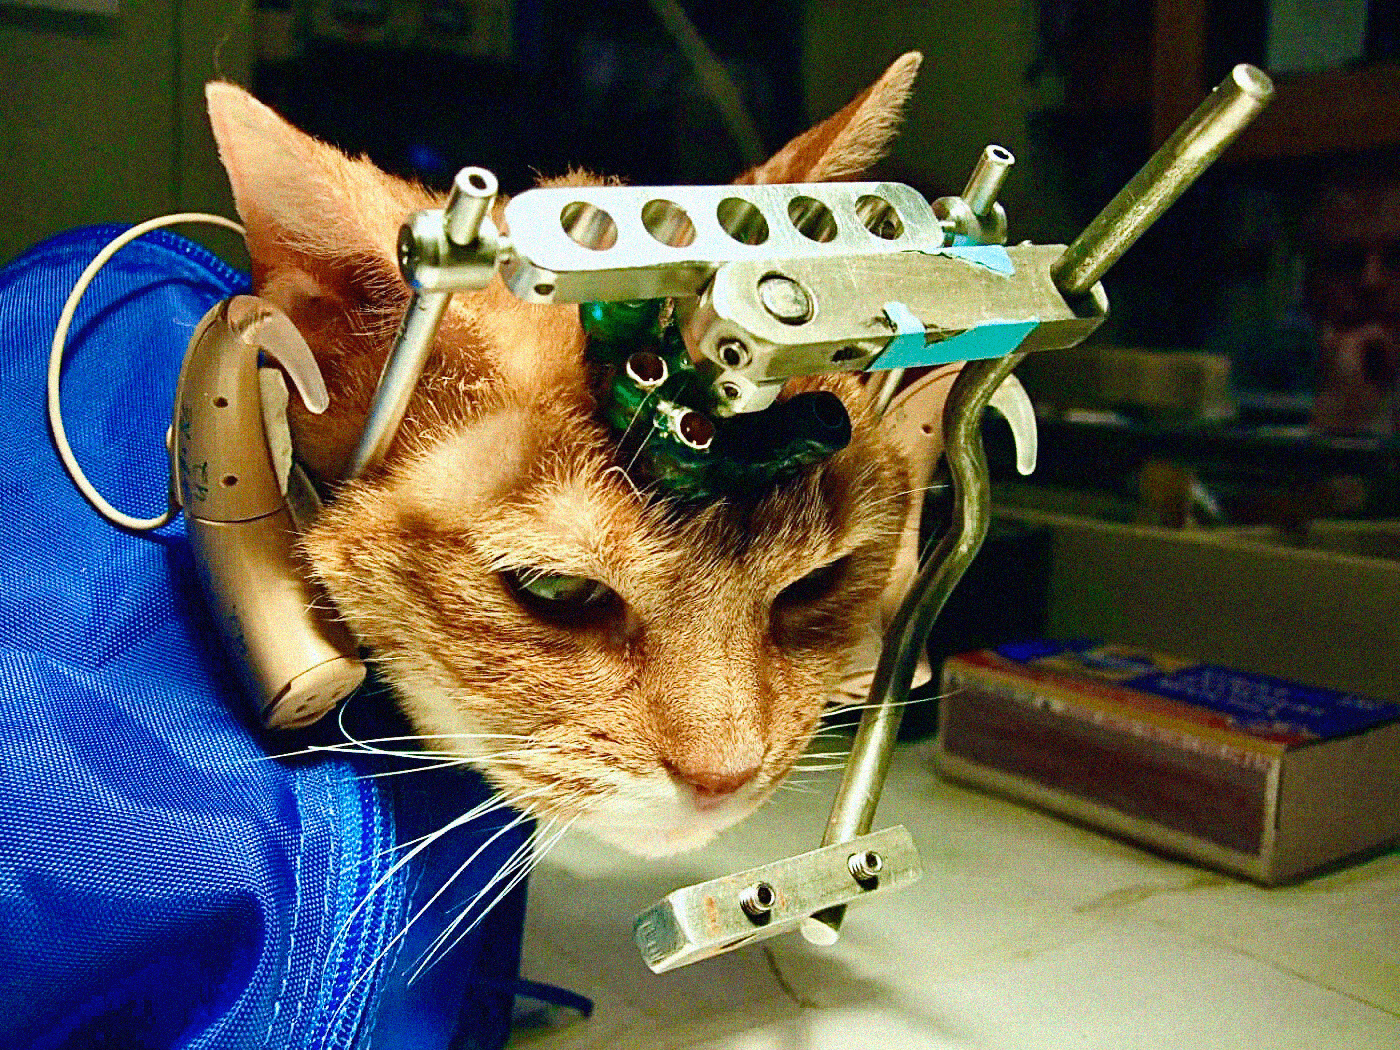 A cat at UW Madison who has a device on their head and is being experimented on.